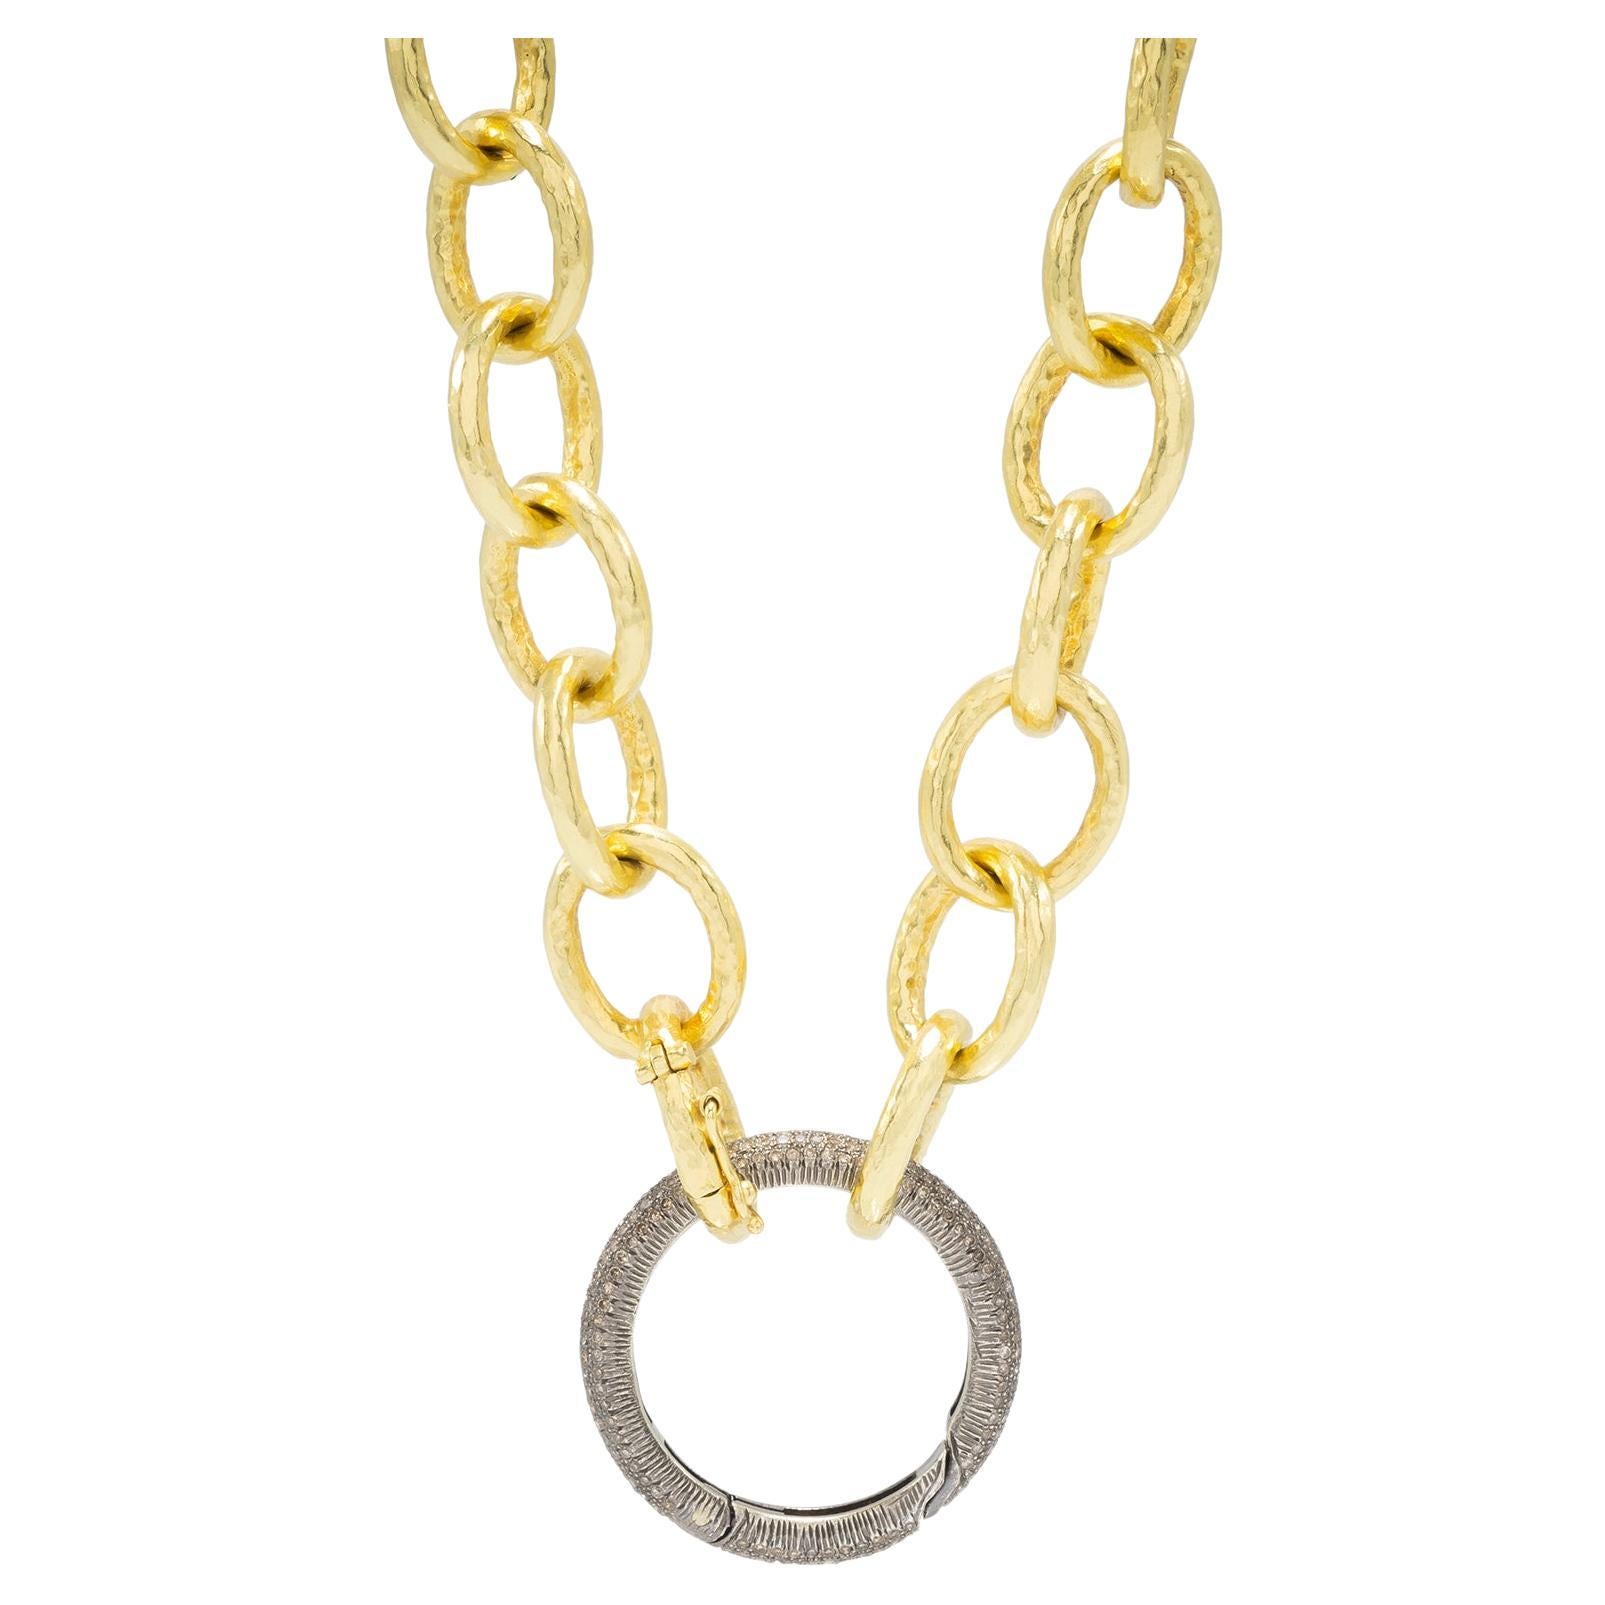 20k Gold Chain with Blackened Silver Diamond Clasp, by Tagili